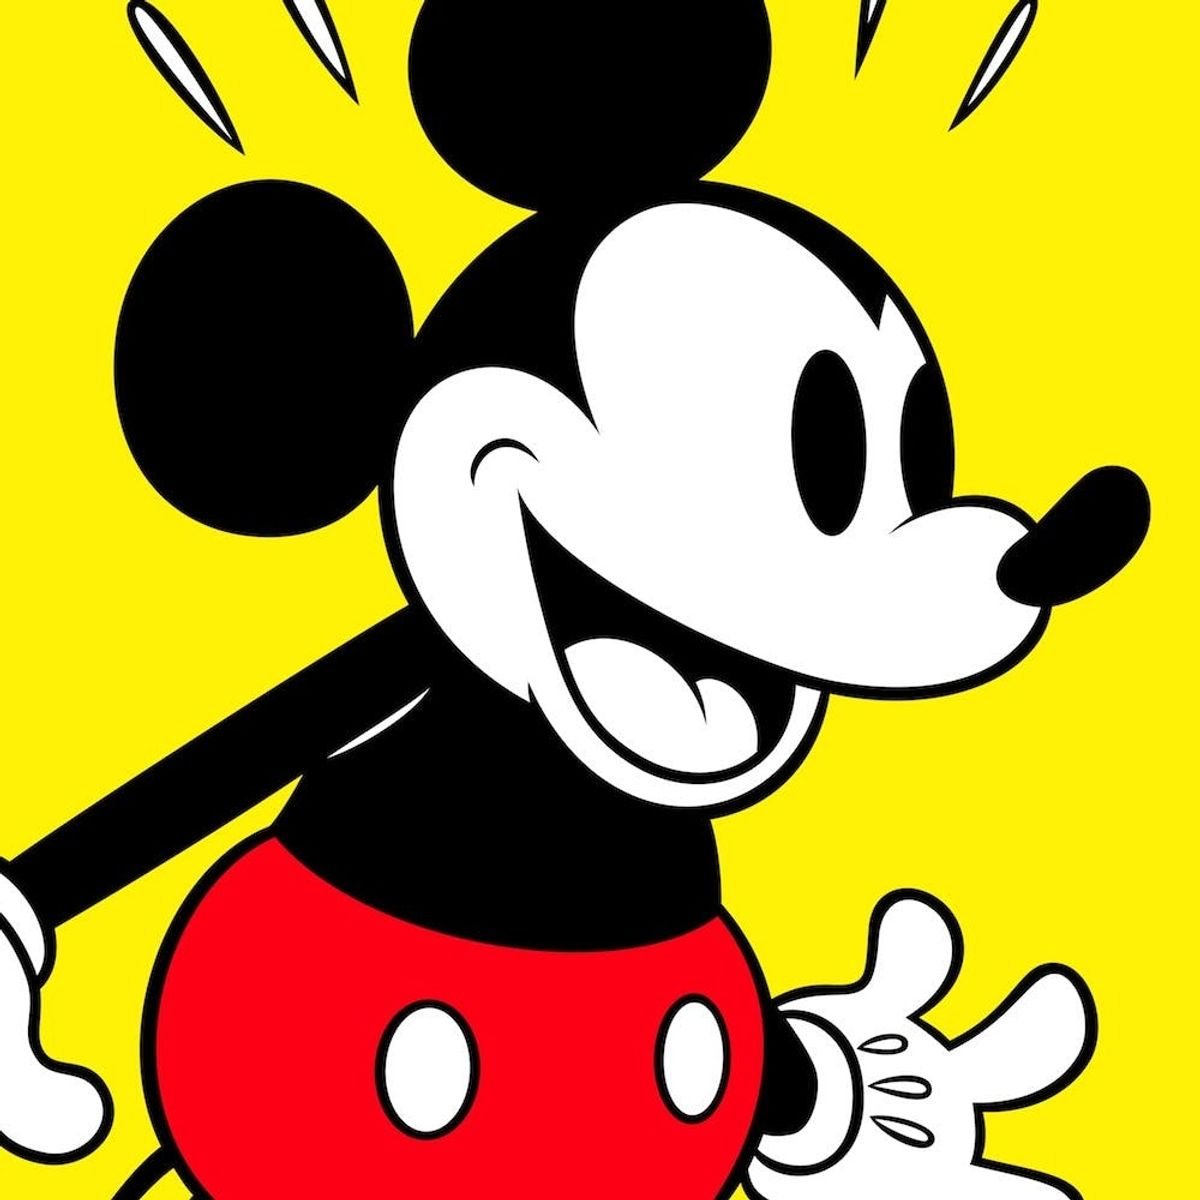 Celebrate Mickey Mouse’s 90th Birthday at This Pop-Up Art Exhibit in NYC